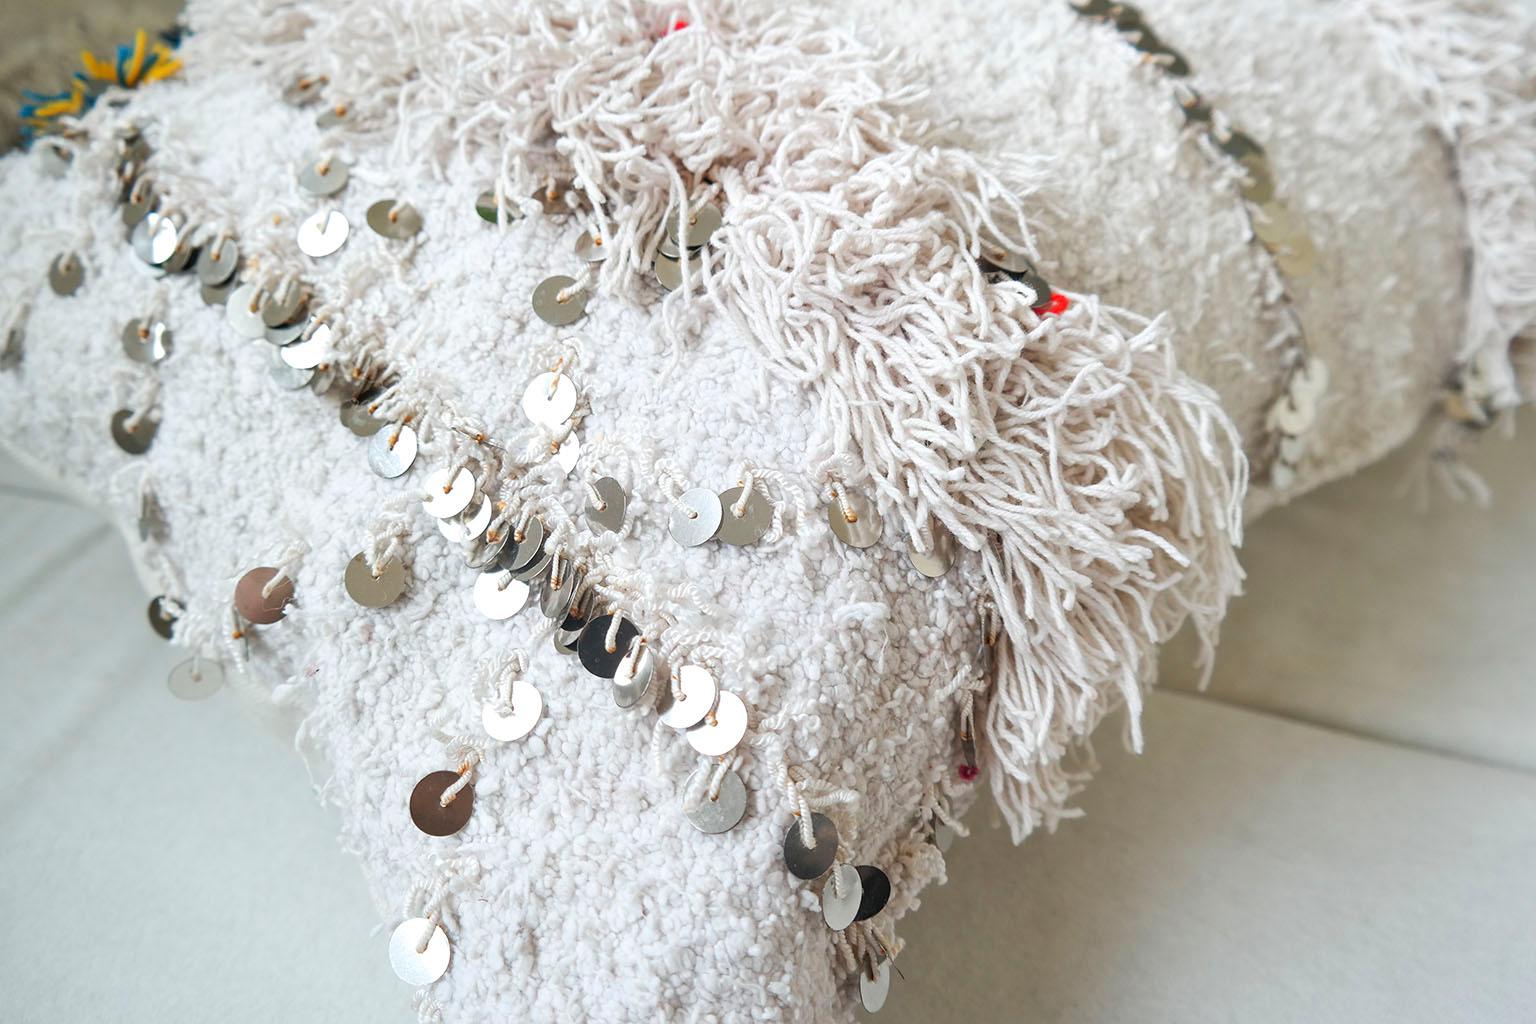 Gorgeous Moroccan wedding blanket pillow cover, refashioned from, by an El Ramla Hamra selected vintage wedding blanket

The story behind the Moroccan wedding blanket also called ''handira'' is beautiful. According to old Moroccan Berber tradition